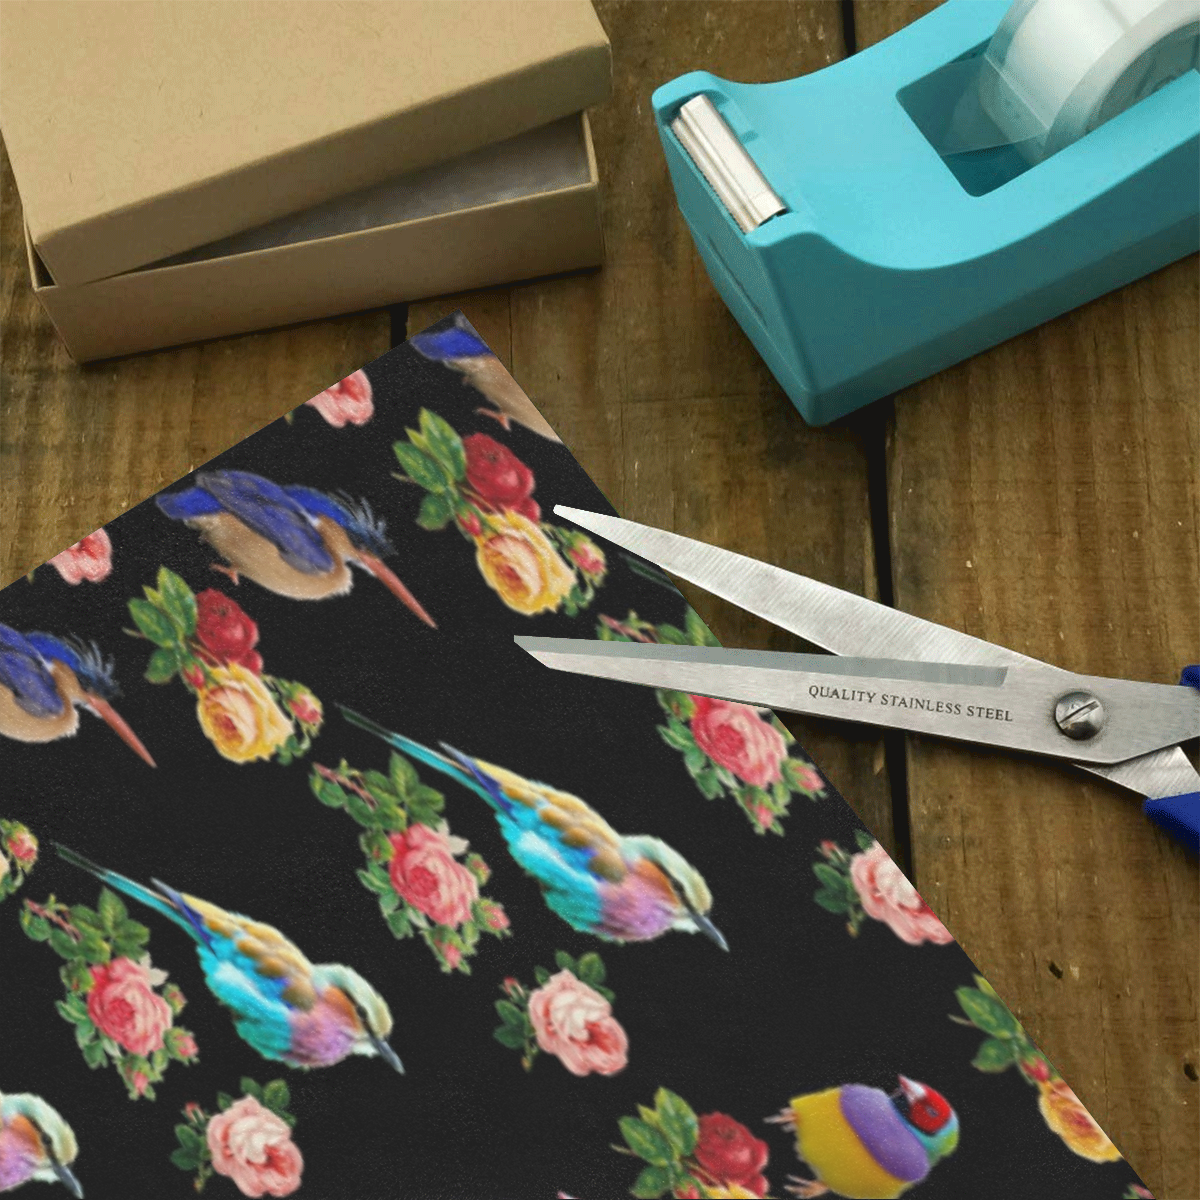 All The Birds And Roses Gift Wrapping Paper 58"x 23" (1 Roll)